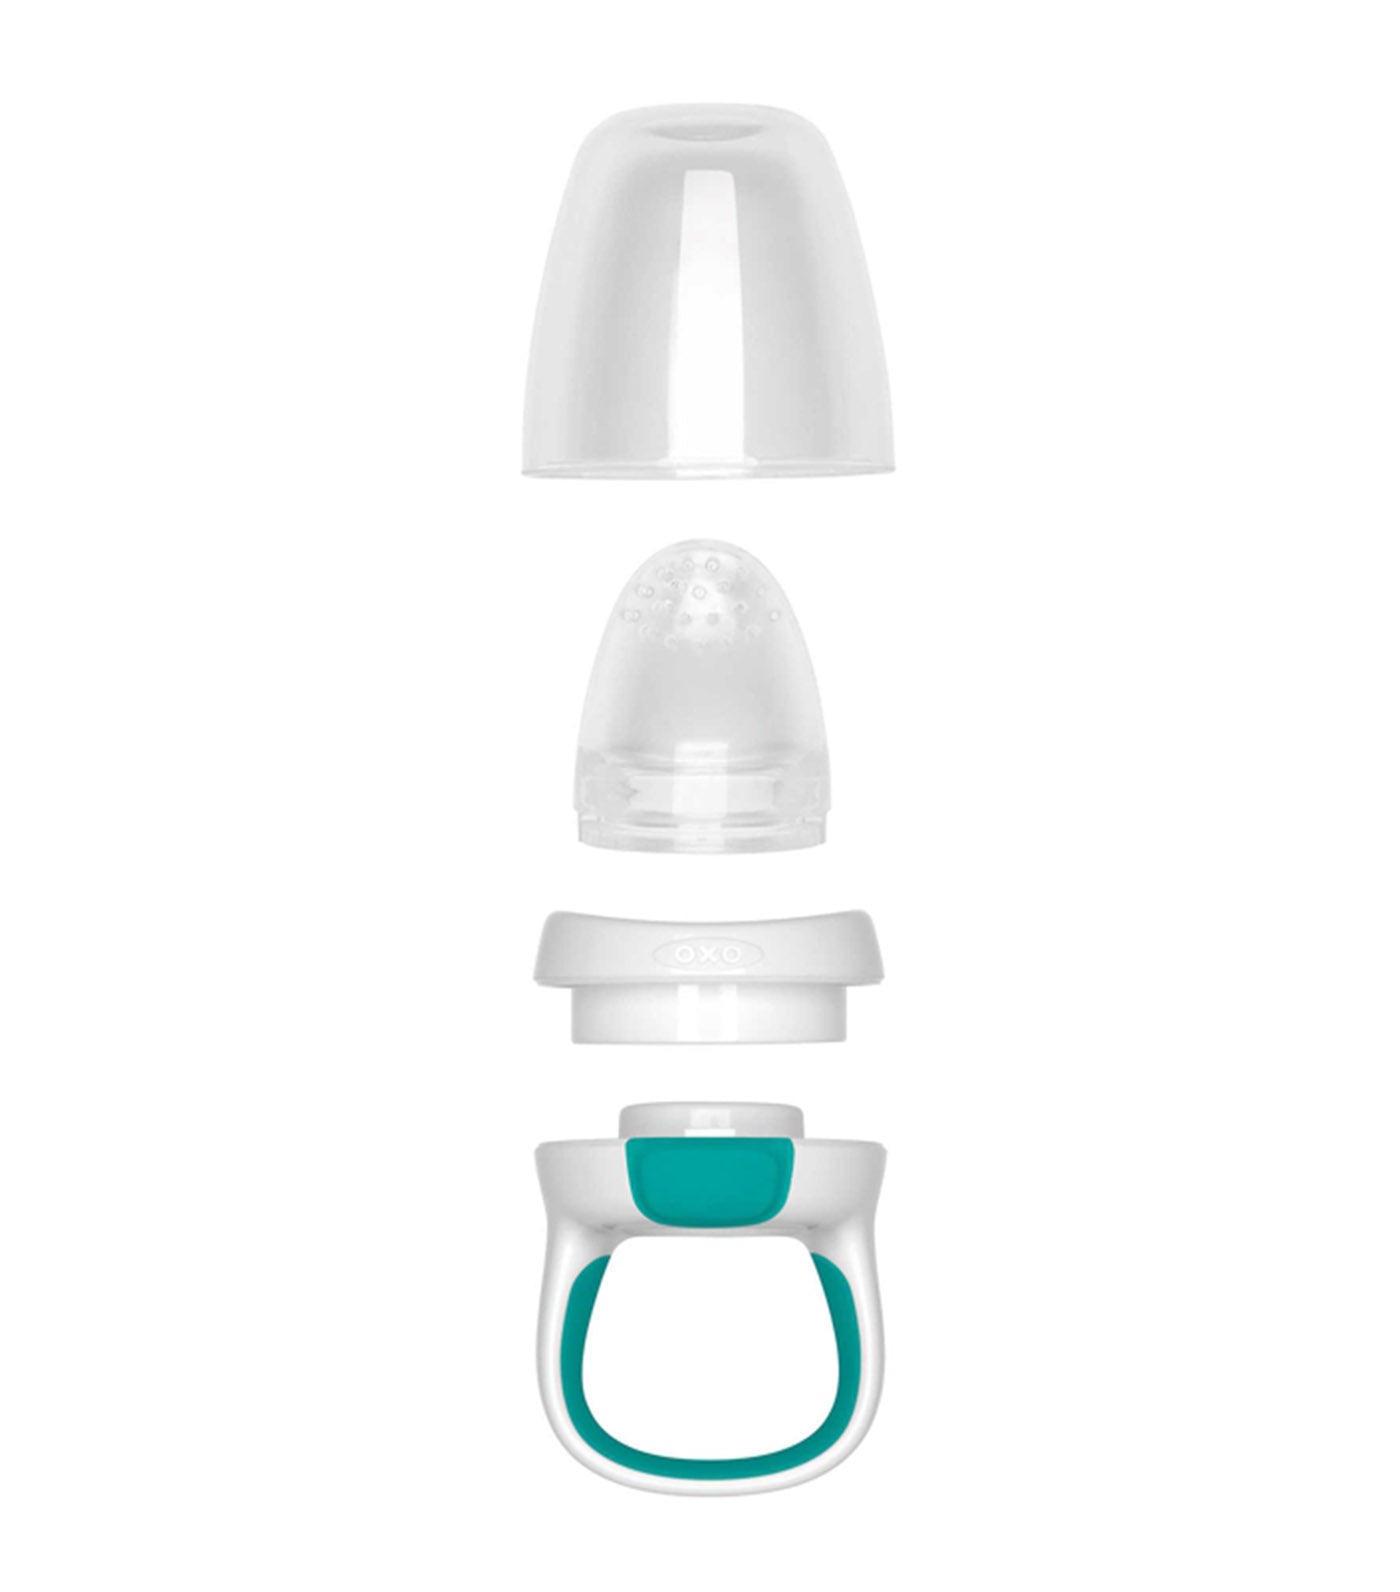 oxo tot teal silicone self-feeder